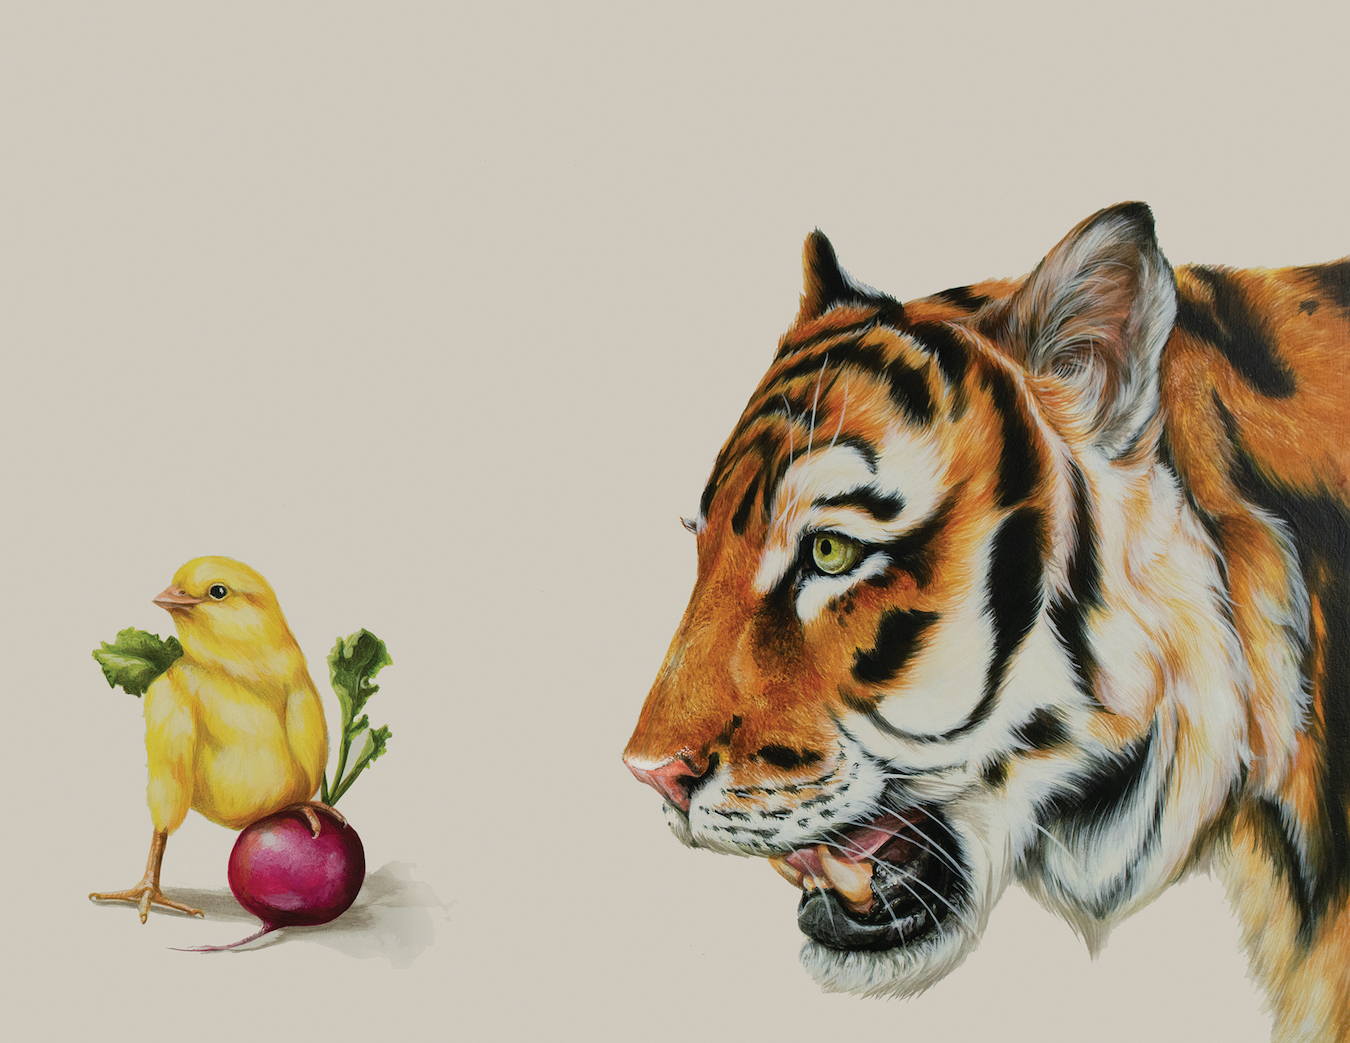 Tricia George: The Tiger and The Chick